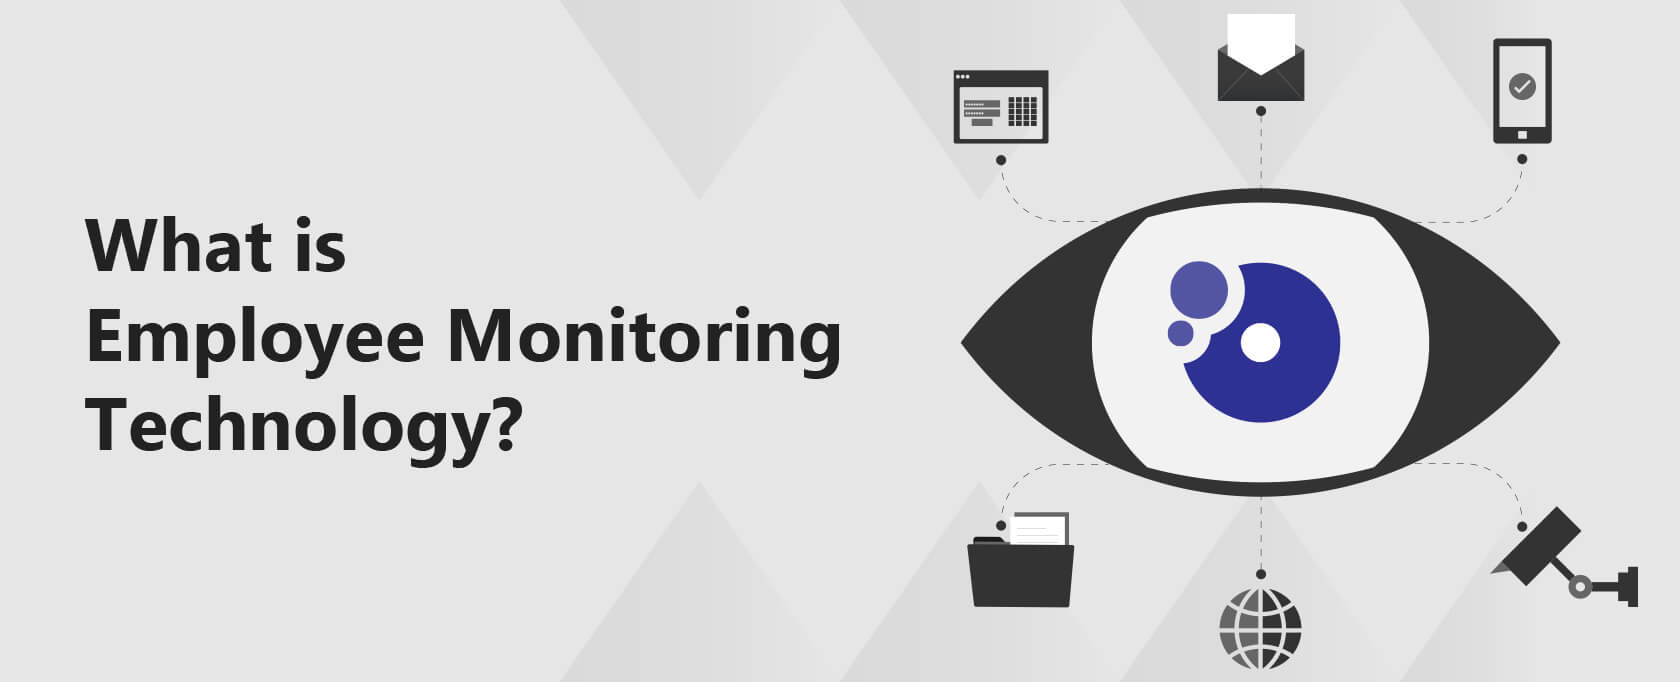 What is Employee Monitoring Technology